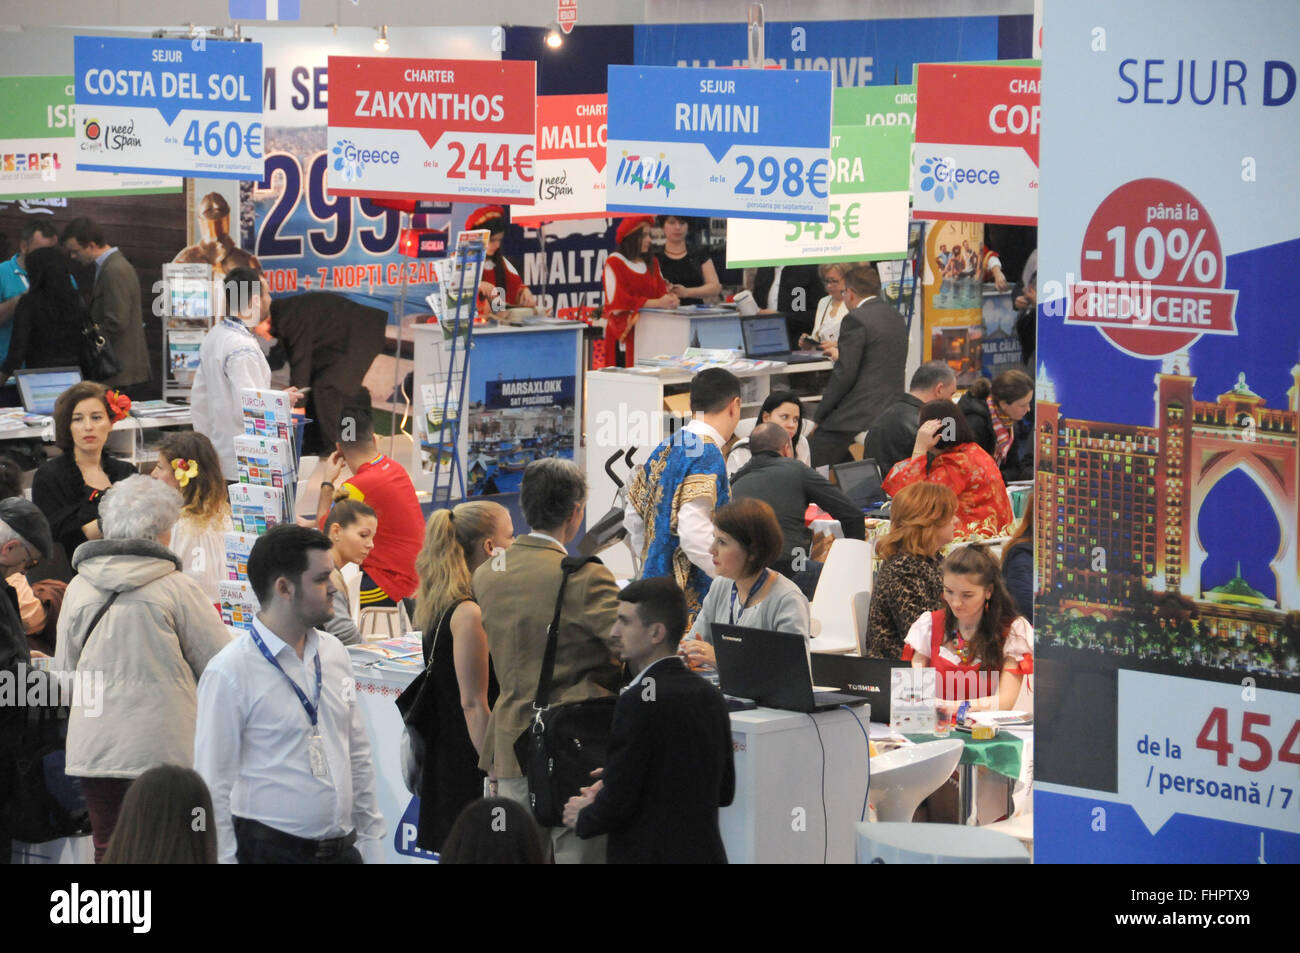 Bucharest. 25th Feb, 2016. Photo taken on Feb. 25, 2016 shows a view of the spring edition of Romania's Travel Fair in Bucharest, capital of Romania. The four-day spring edition of Romania's Travel Fair kicked off on Thursday, which attracts more than 280 travel agencies from 15 countries. © Chen Jin/Xinhua/Alamy Live News Stock Photo